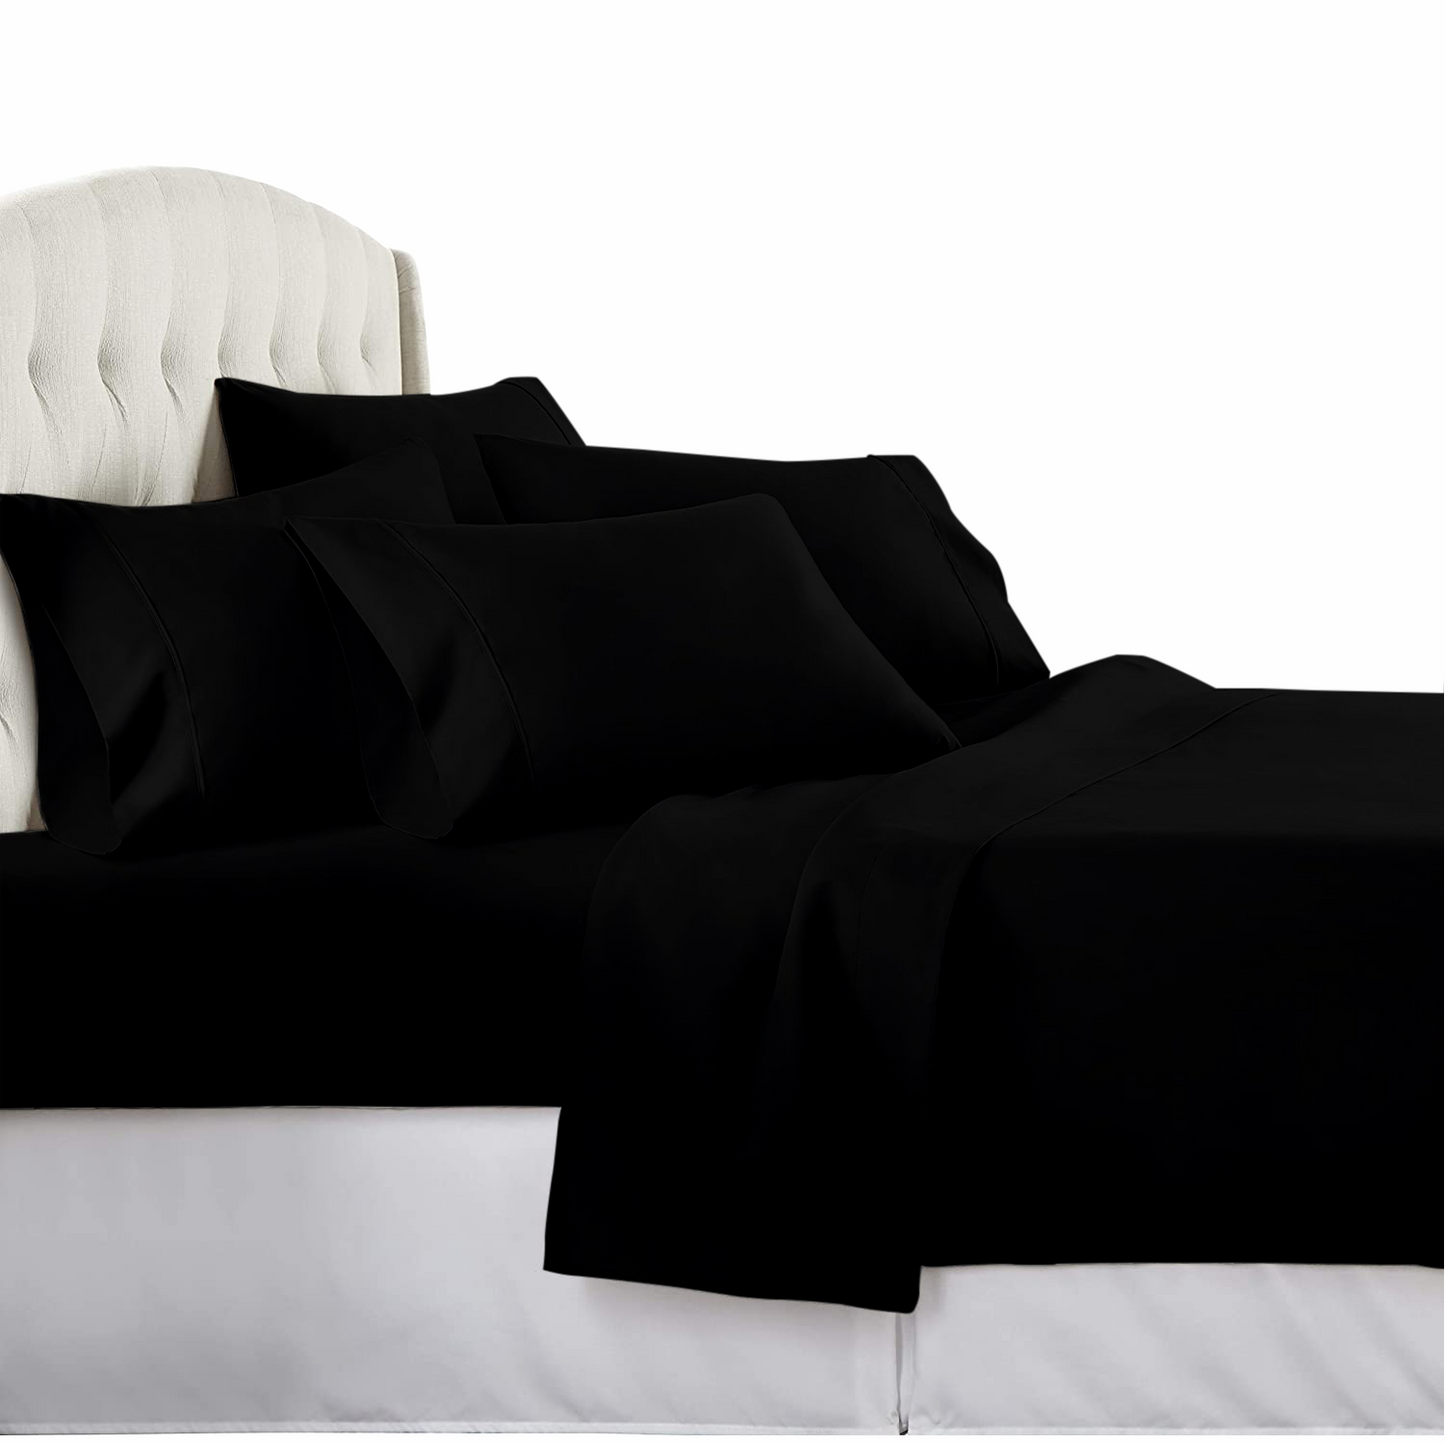 King Size Bed Sheet Set Cotton 300 TC - 1 Flat Sheet and 2 Pillow Covers